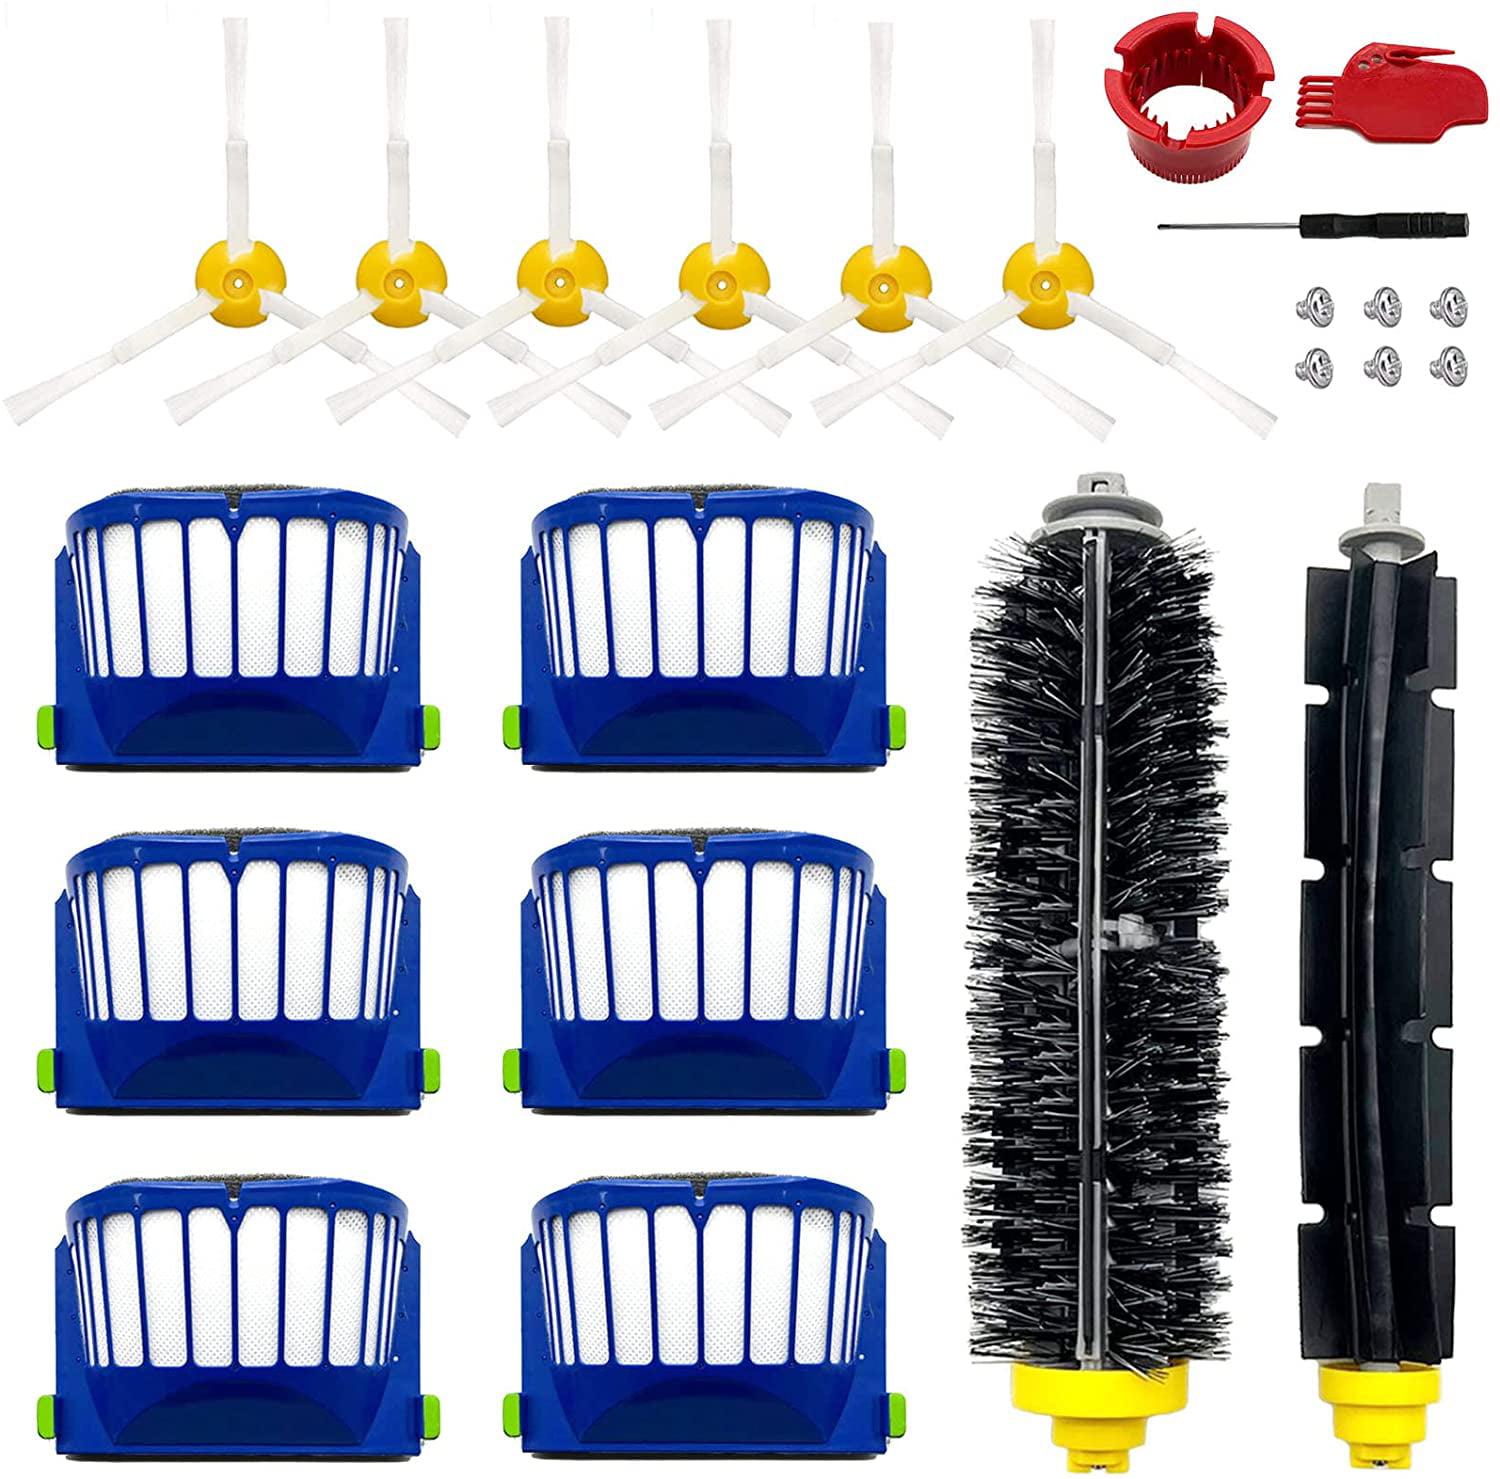 For iRobot Roomba 600 Series Replacement Brush and Filters Replenishment Kit 